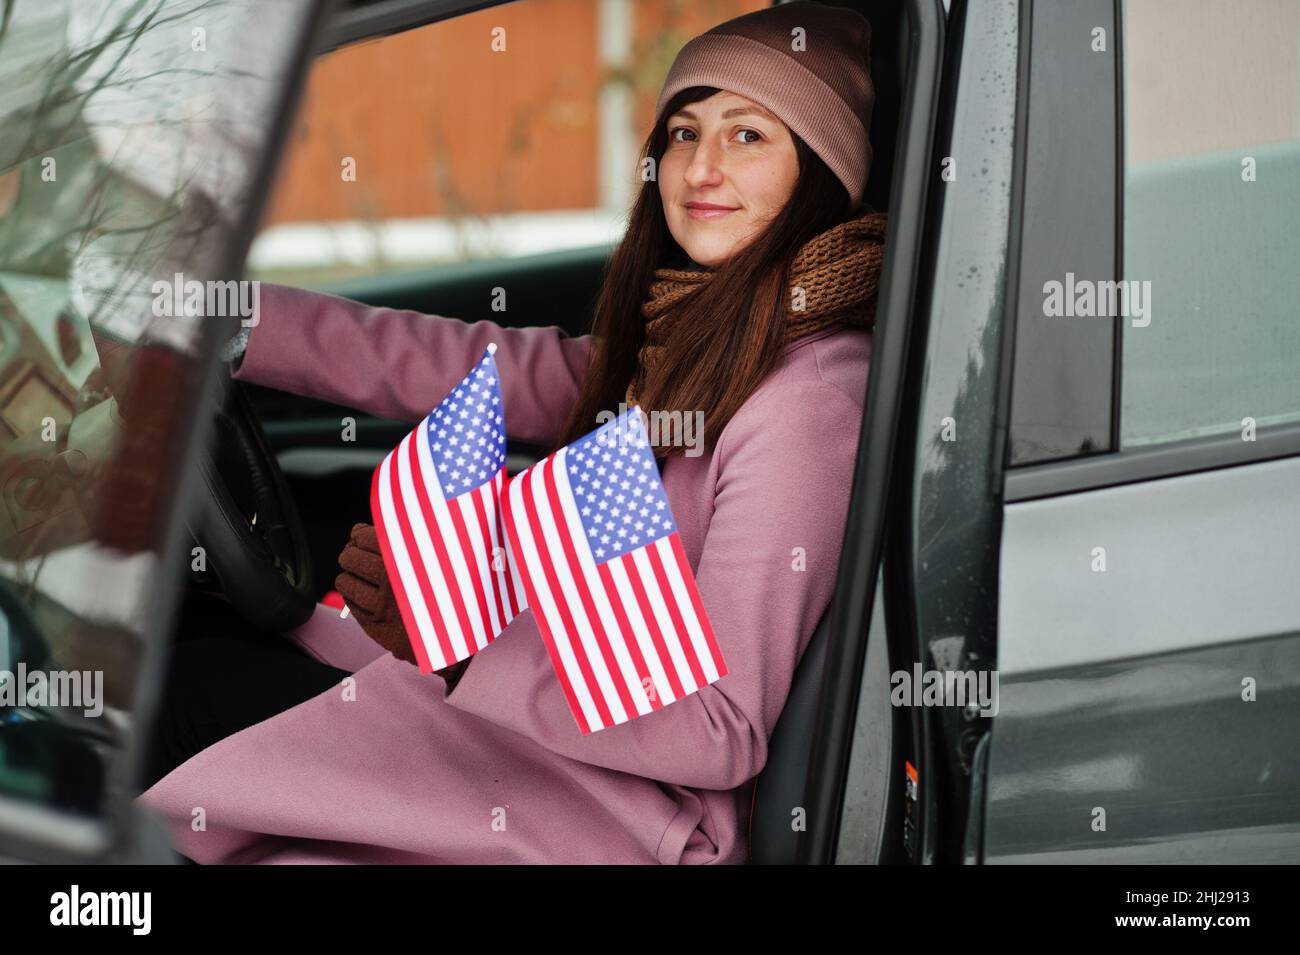 Young woman with USA flag siting on car. Stock Photo